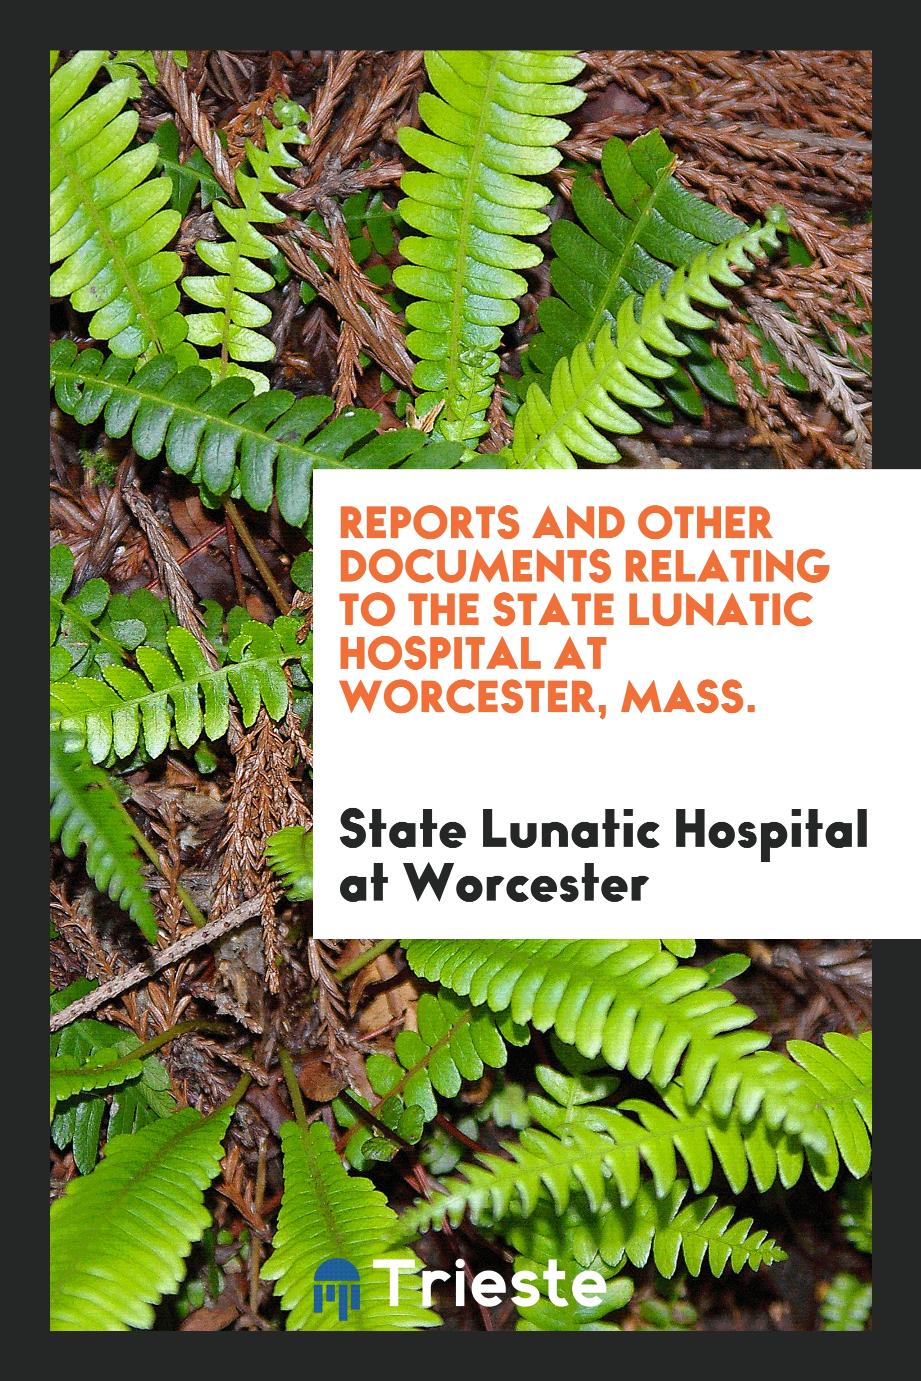 Reports and Other Documents Relating to the State Lunatic Hospital at Worcester, Mass.